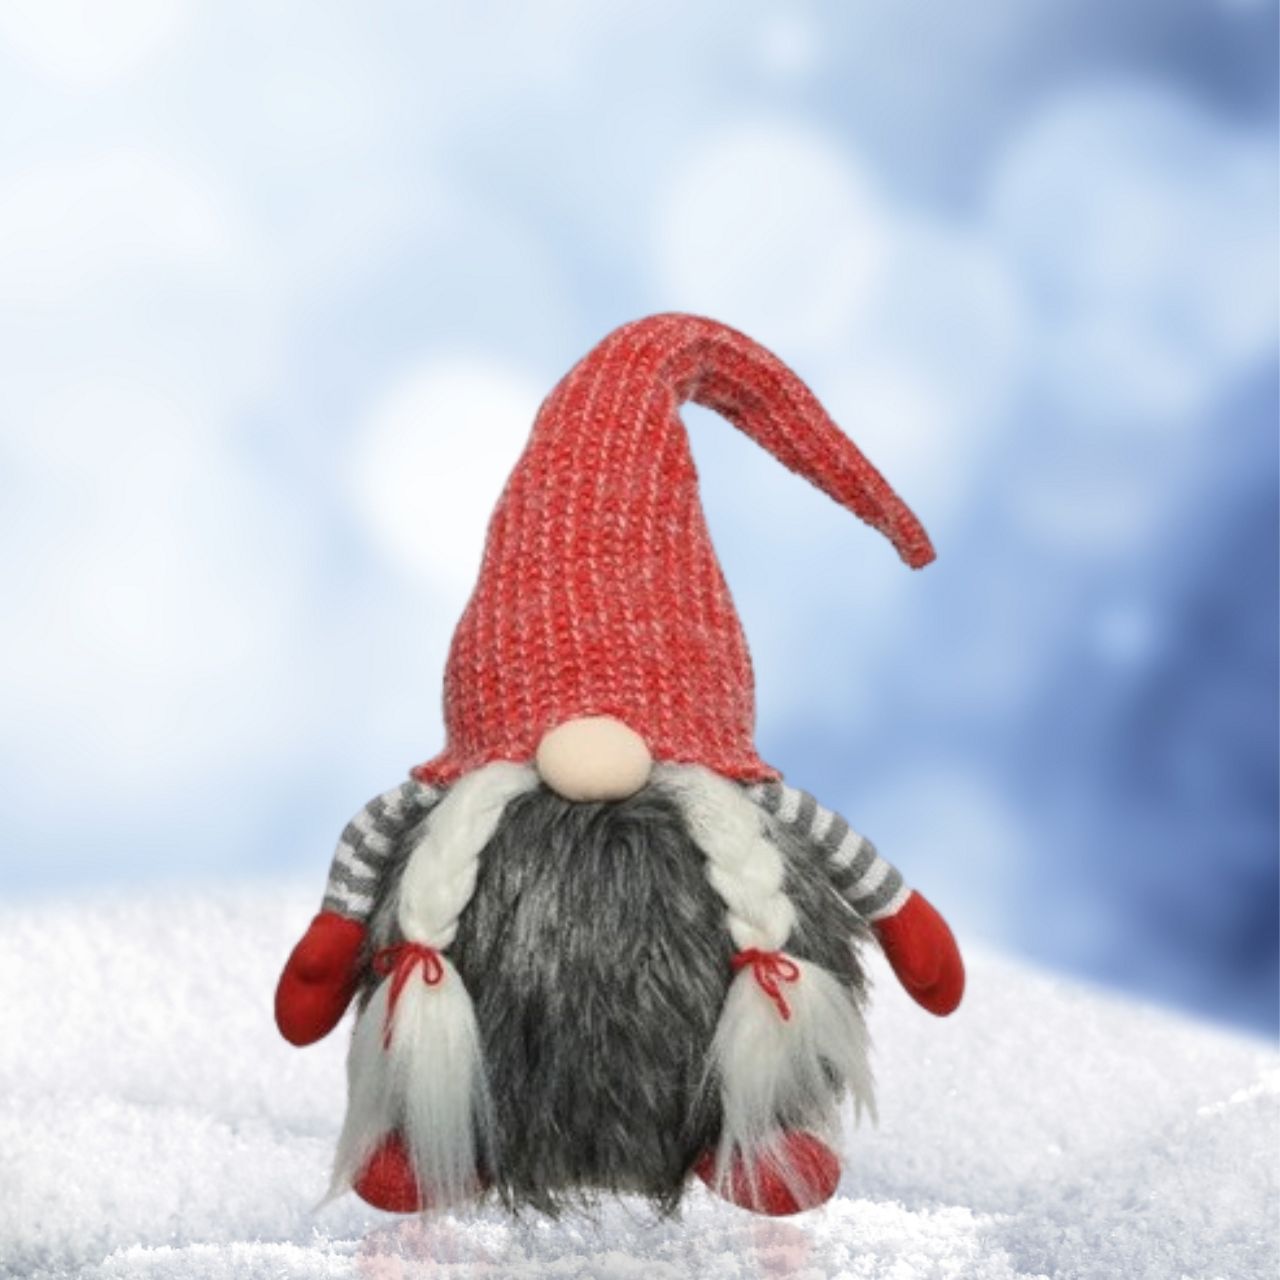 Kaemingk Christmas Gnome - Woman  Add some character & festive charm to your home for the holidays with our adorable Christmas gnomes. Cute scandinavian gnomes are so whimsical and fun they make everyone smile. They are perfect for Christmas decor and every day too.